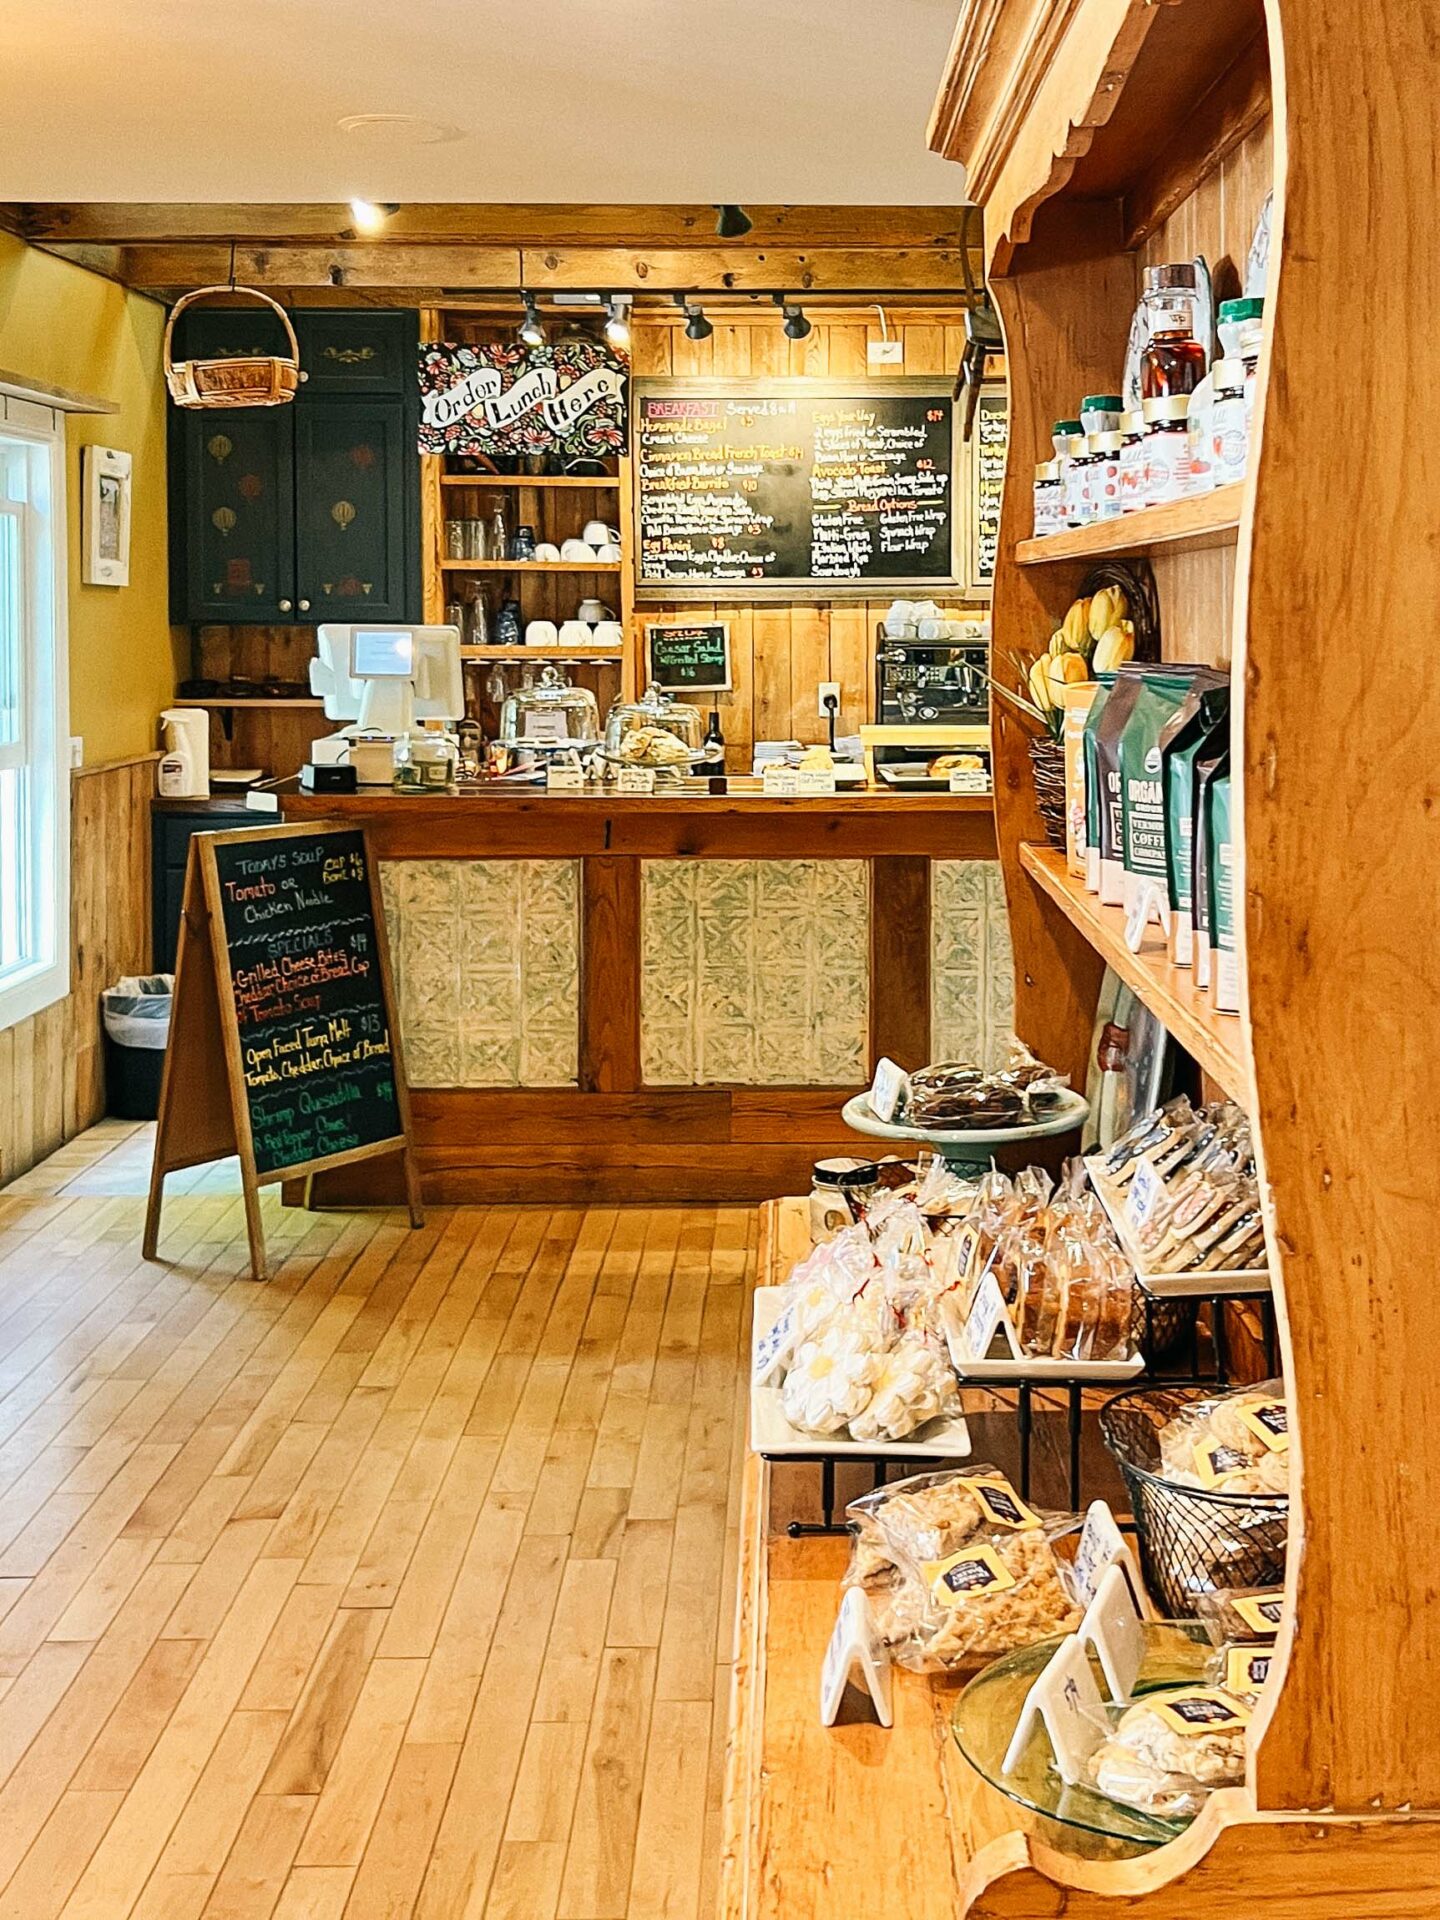 Dorset Bakery | Things to Do in Manchester